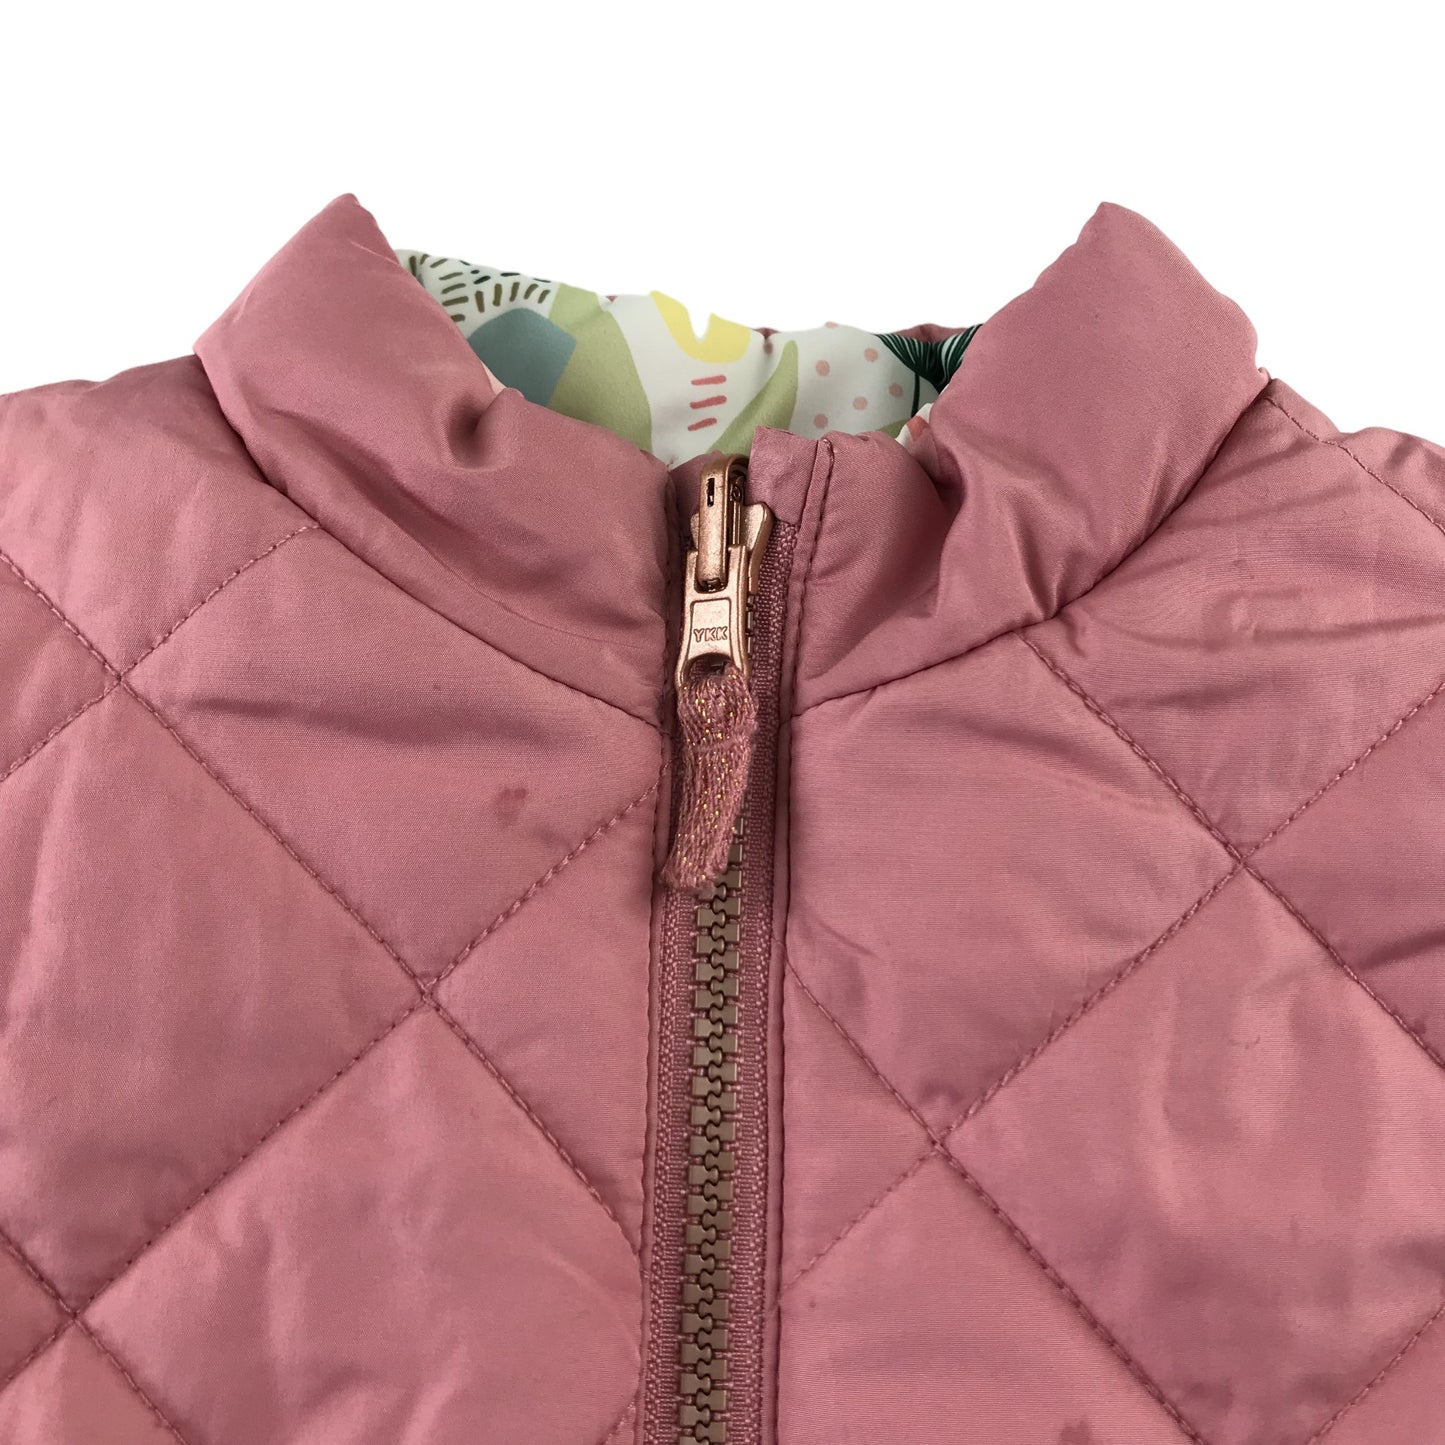 Nutmeg reversible gilet 5-6 years pink and white floral puffer